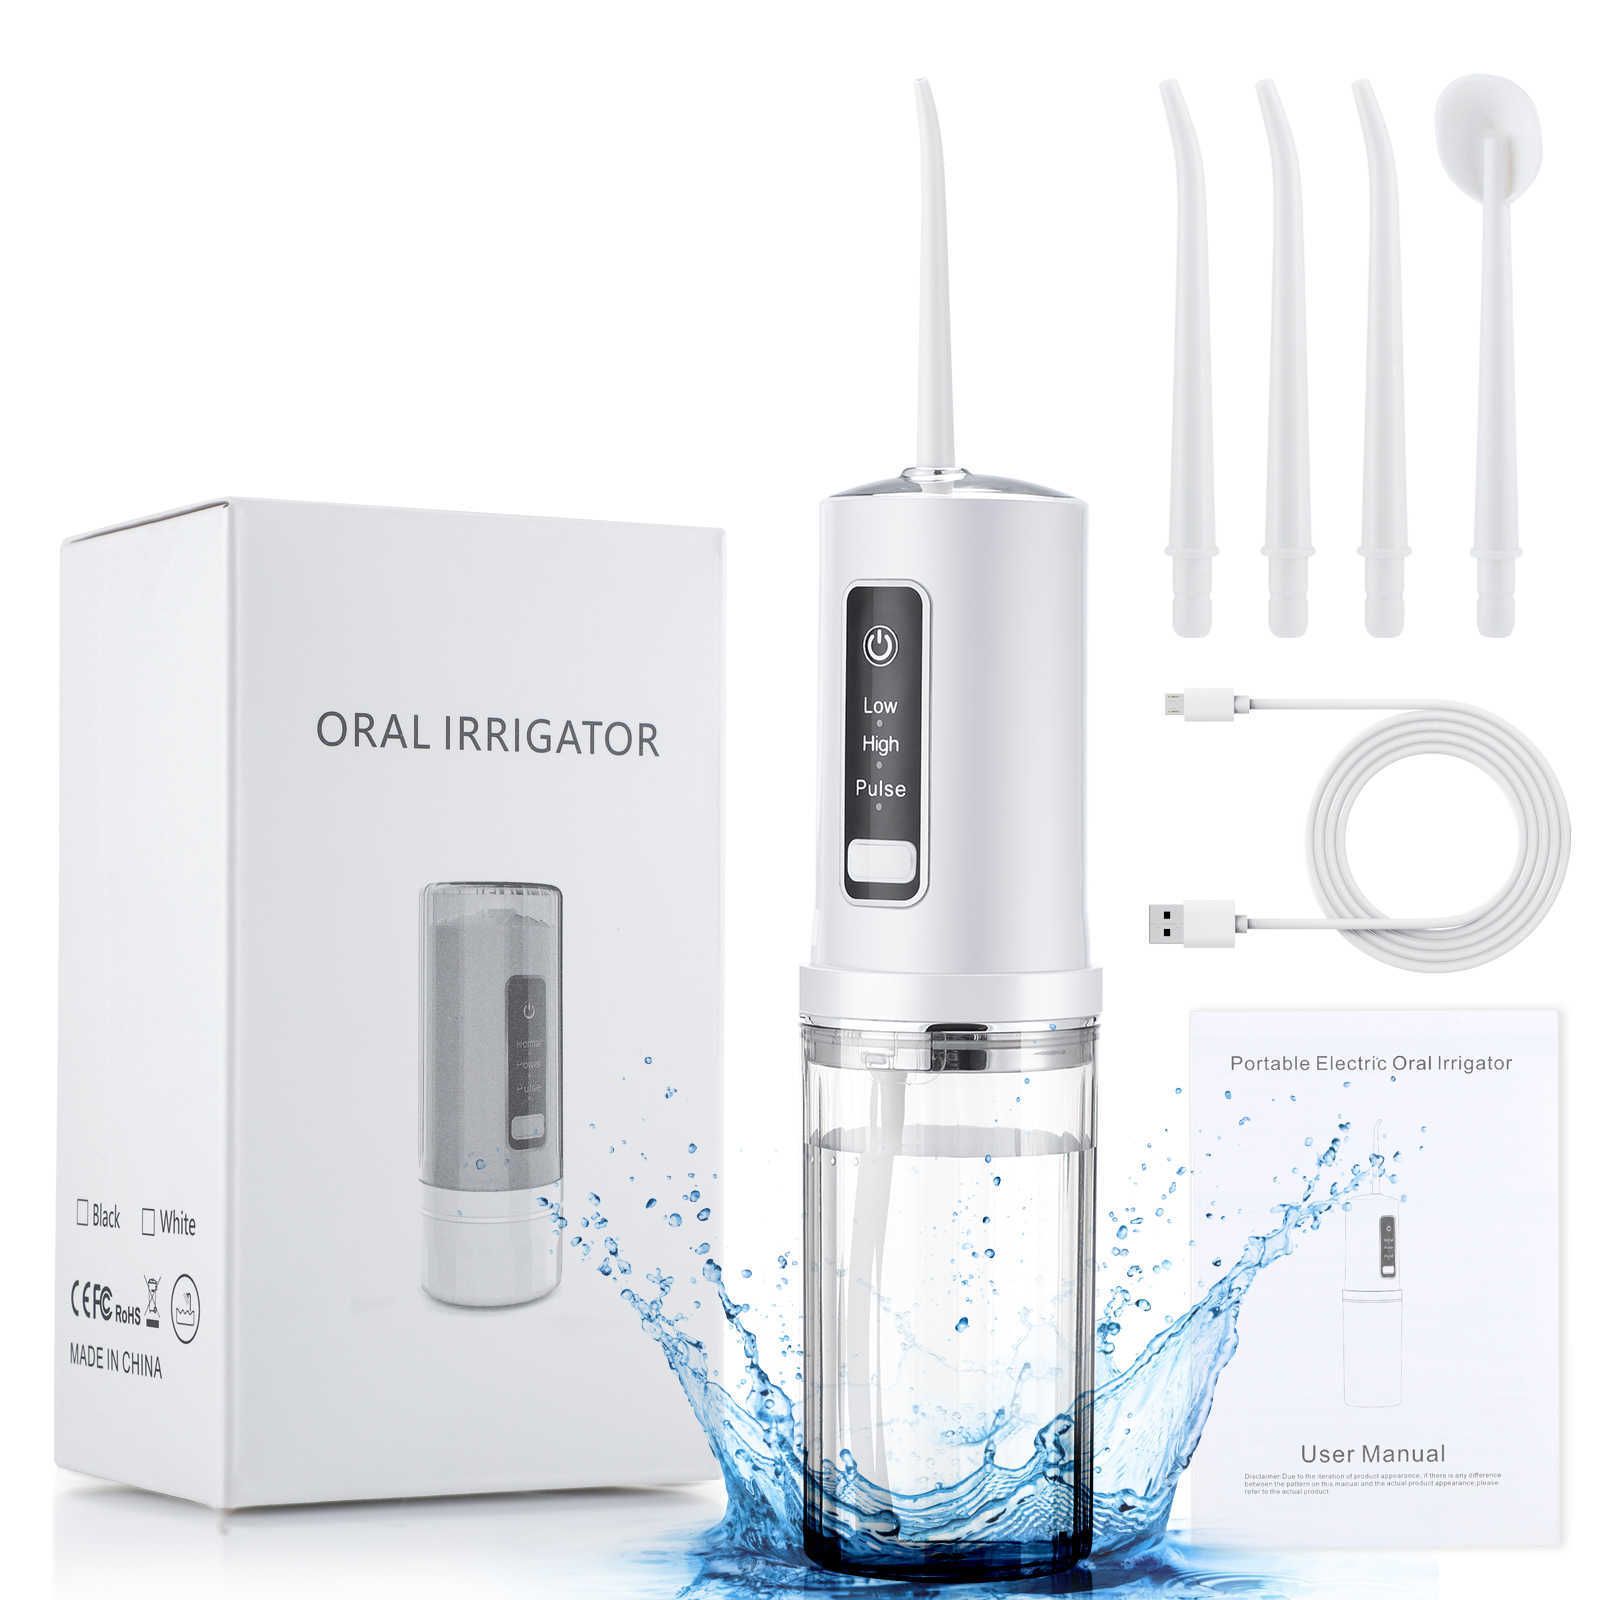 Only Oral Irrigator